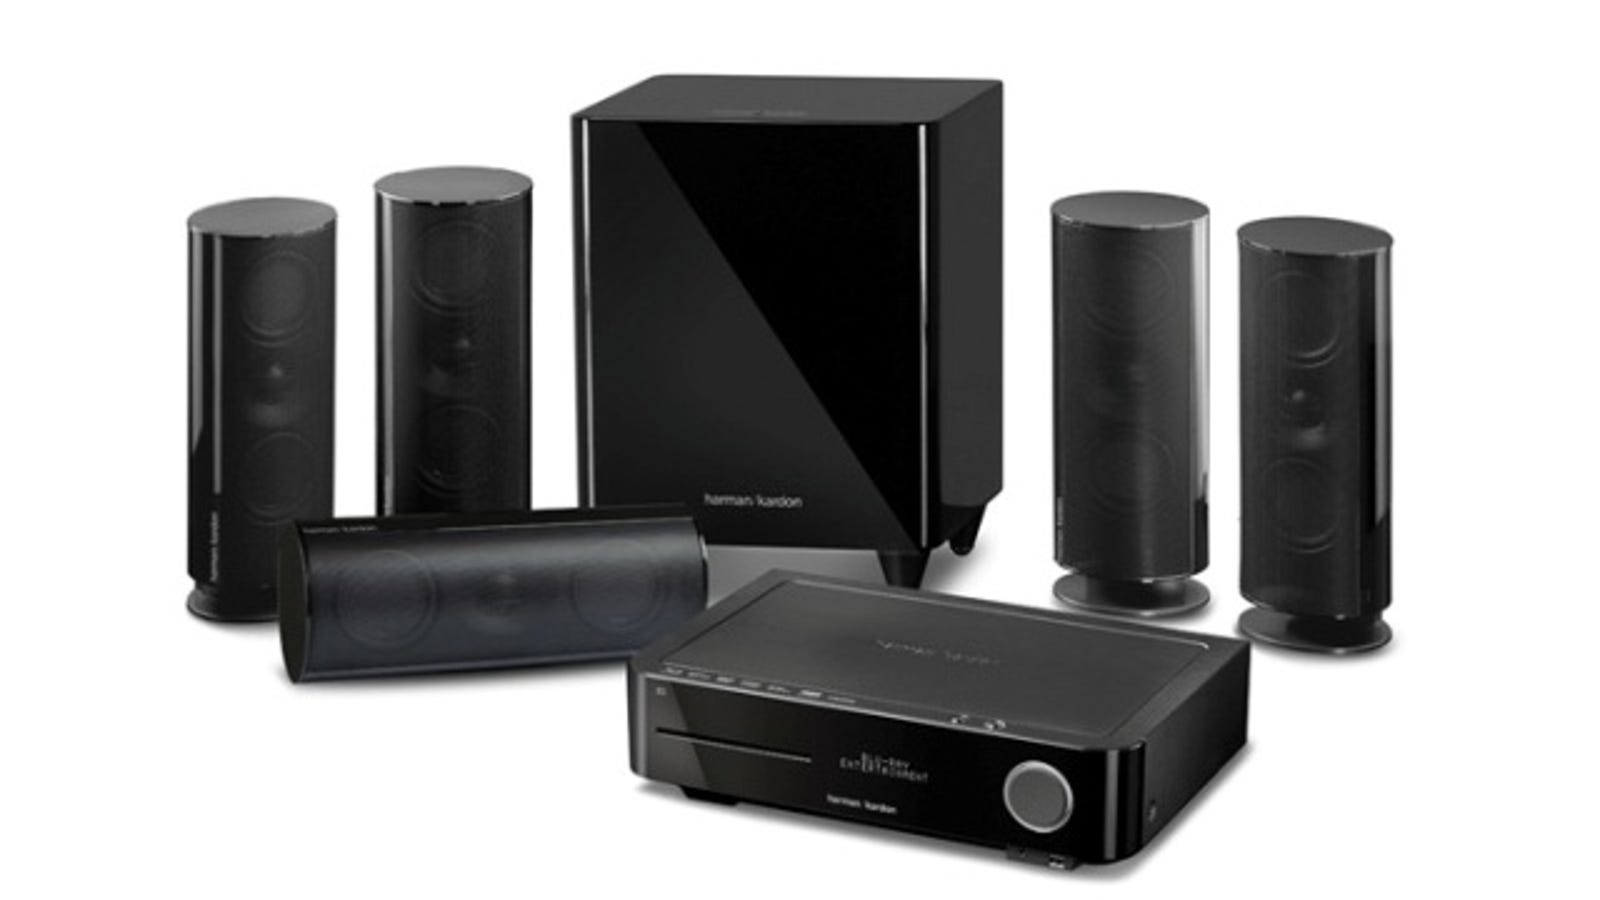 Harman Kardon's New Home Theater Gear Is BMW Expensive